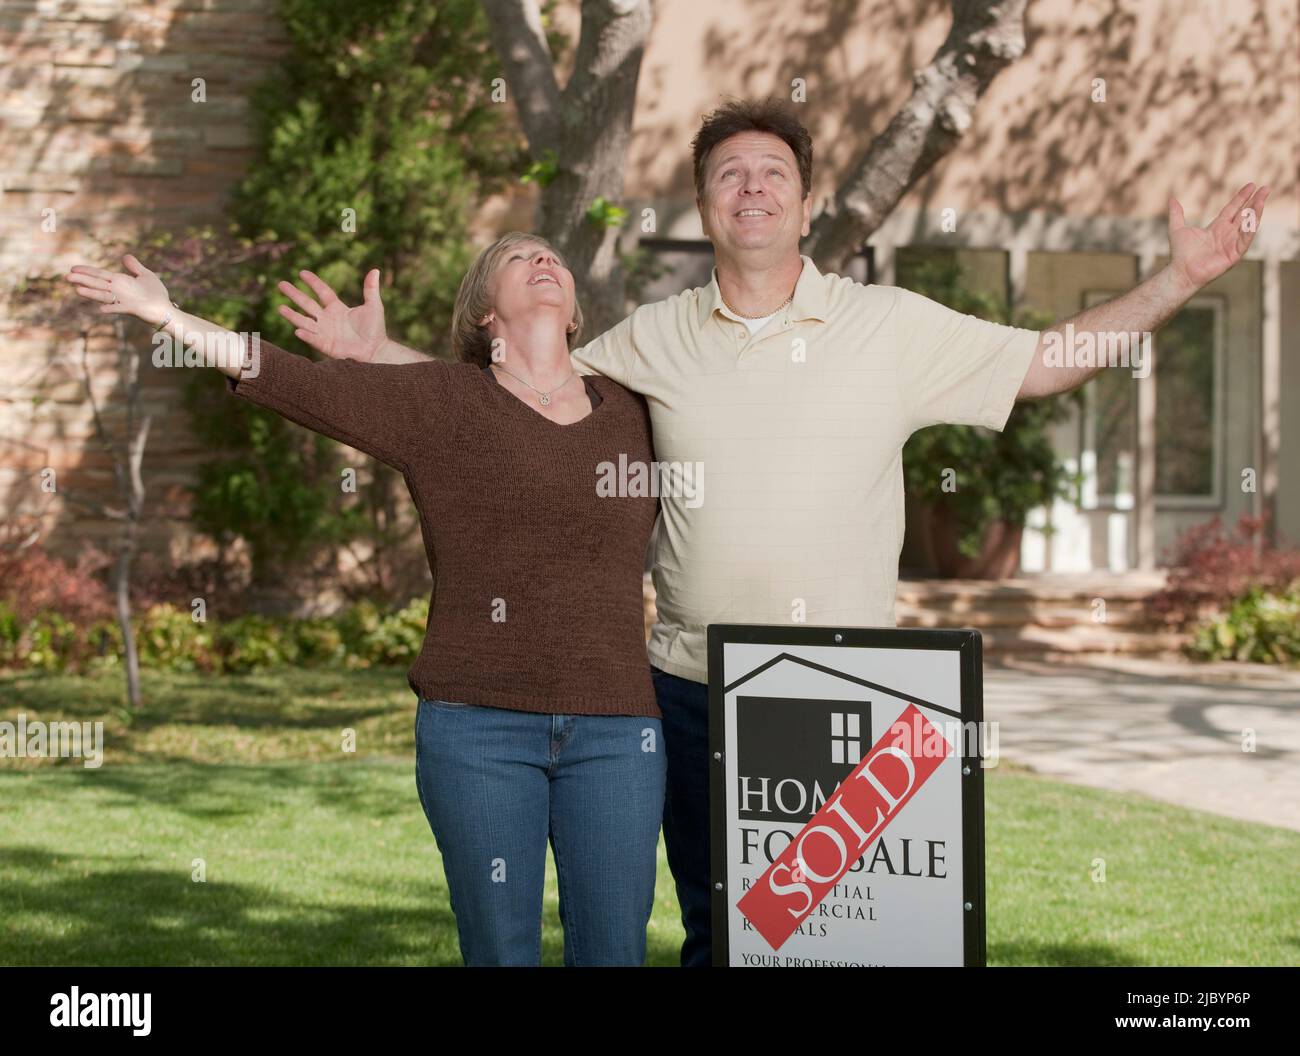 Couple standing in yard with sold sign Banque D'Images